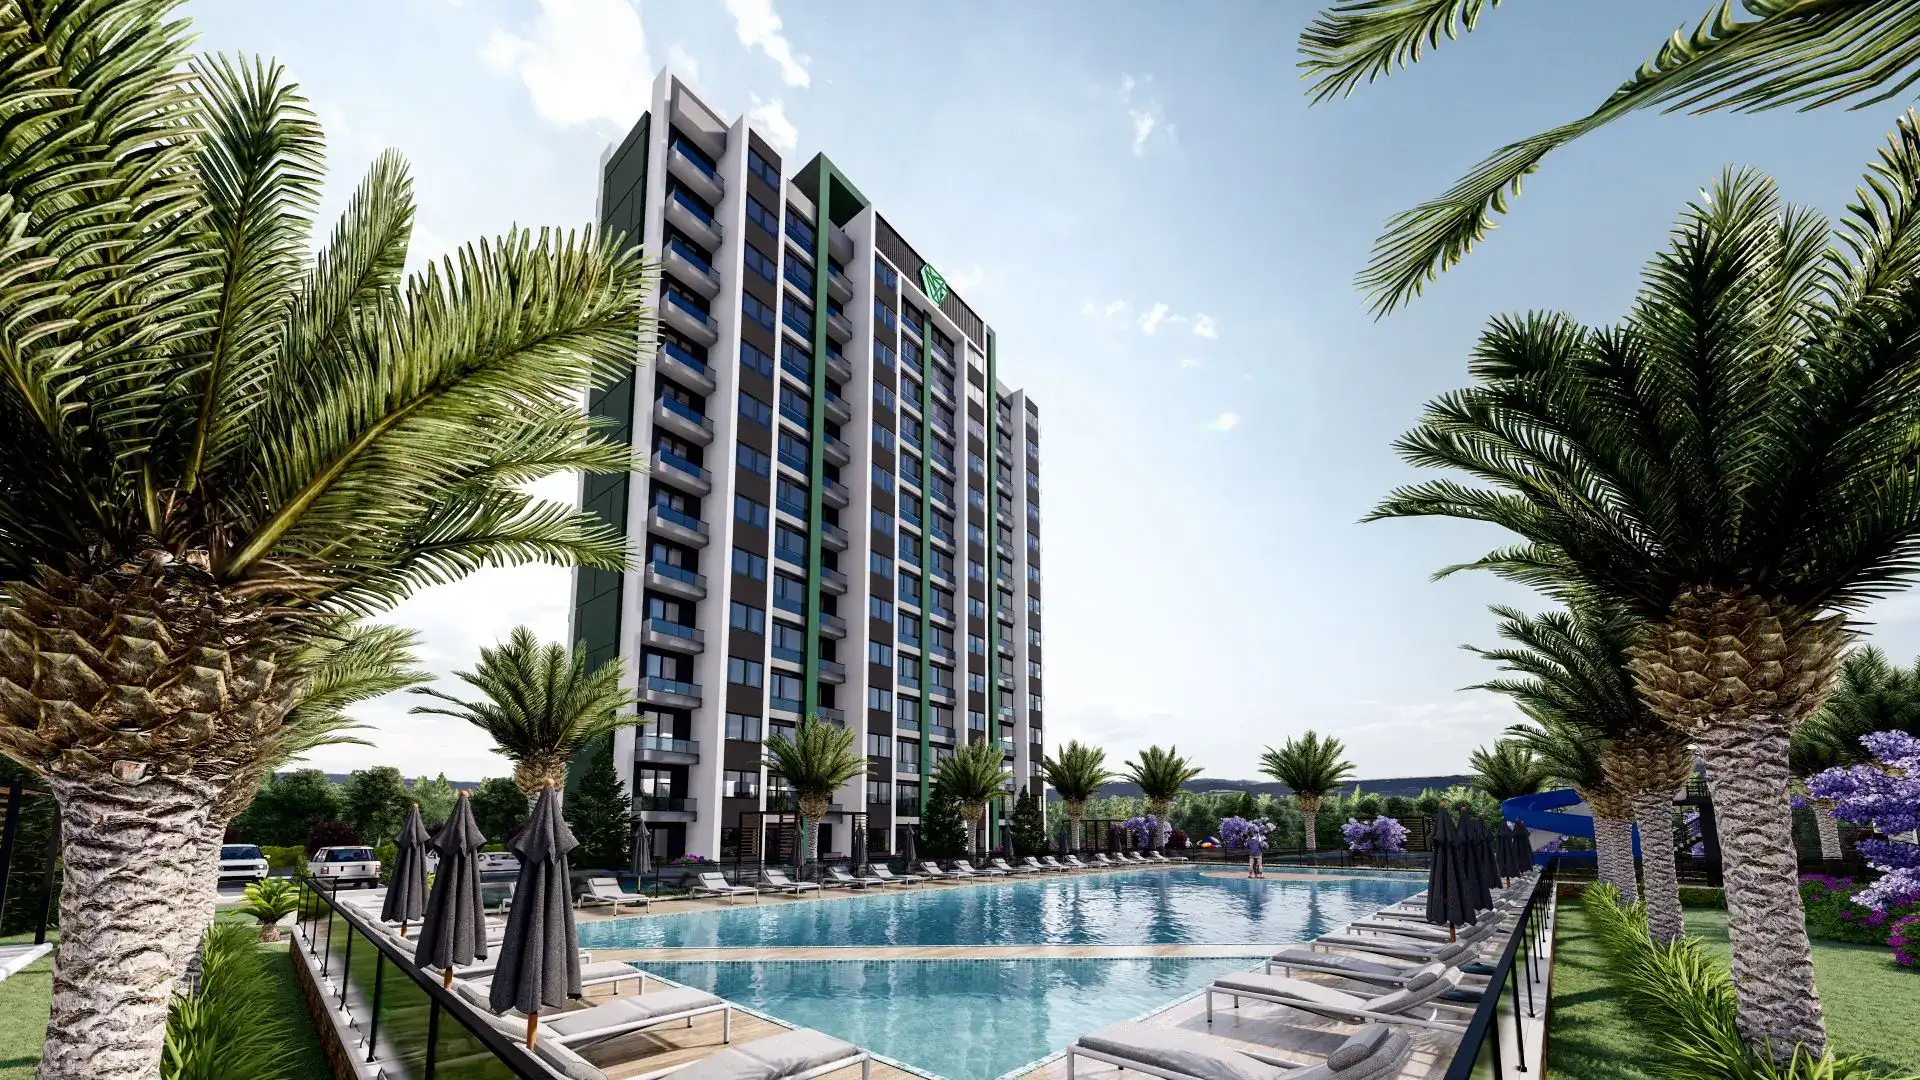 NEW LUXURY PROJECT UNDER CONSTRUCTION IN MERSIN